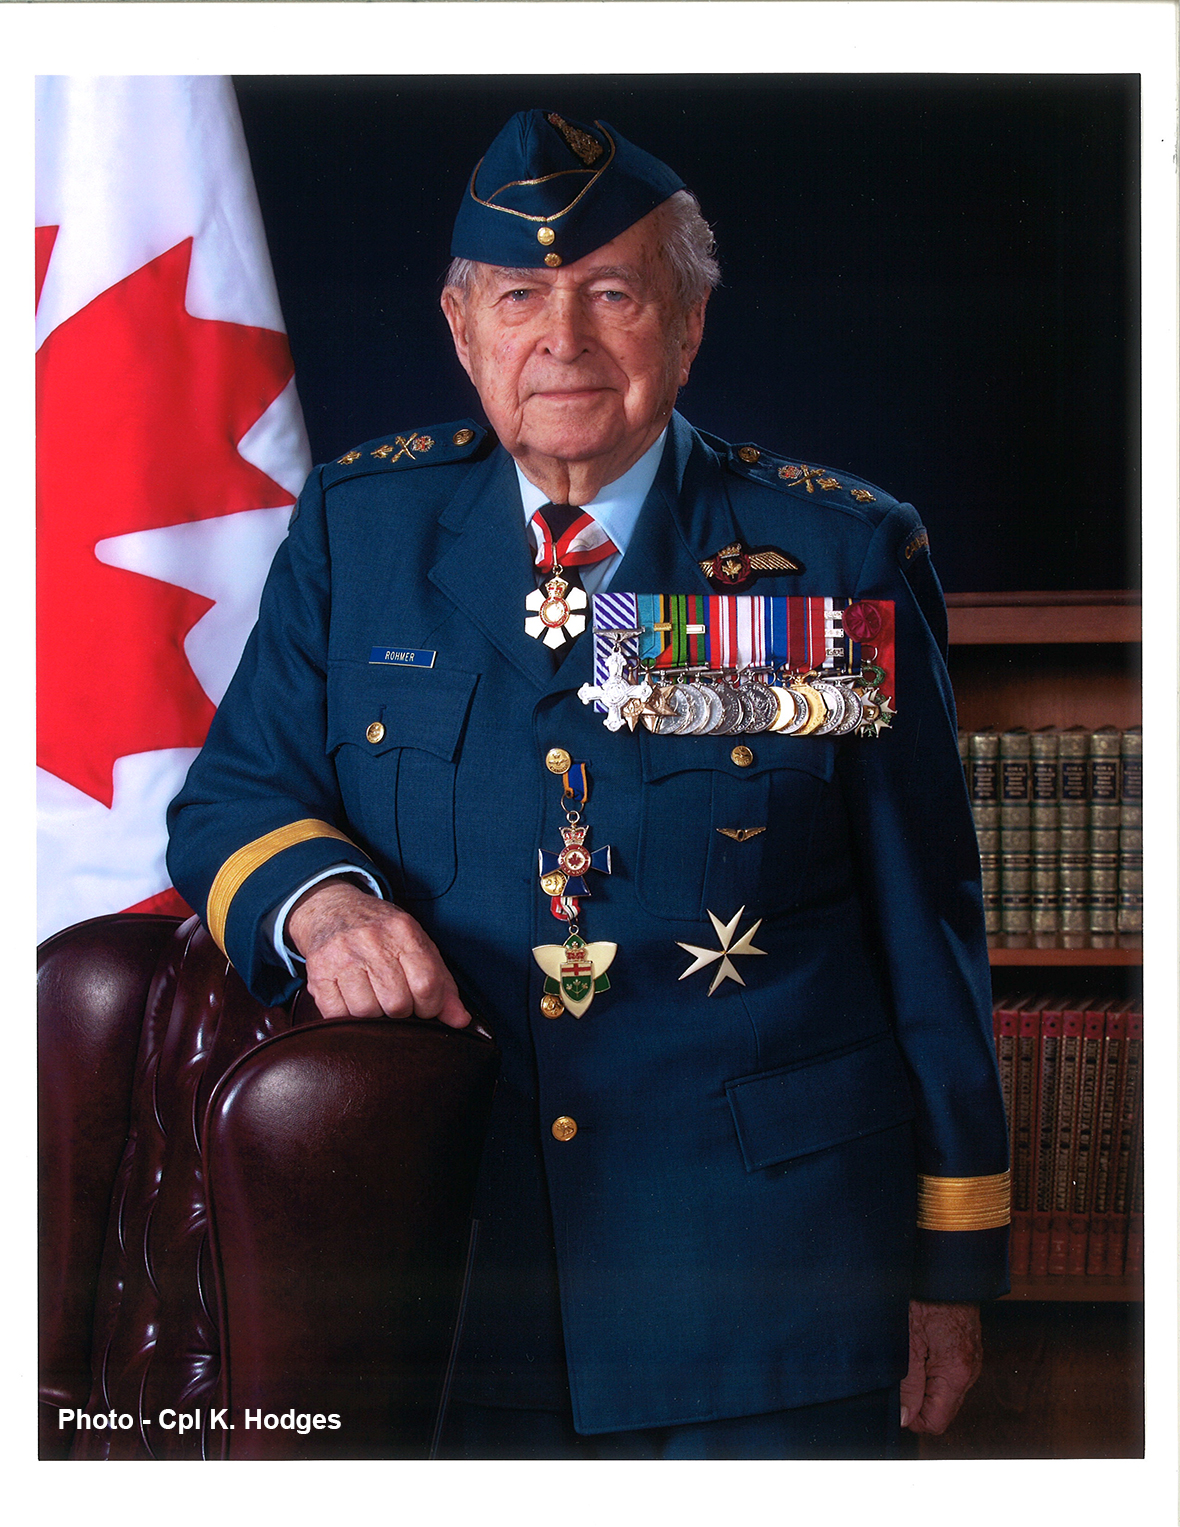 Major-General (Retired) Richard Rohmer as the Honorary Advisor to the Chief of the Defence Staff. Photo: Cpl K. Hodges